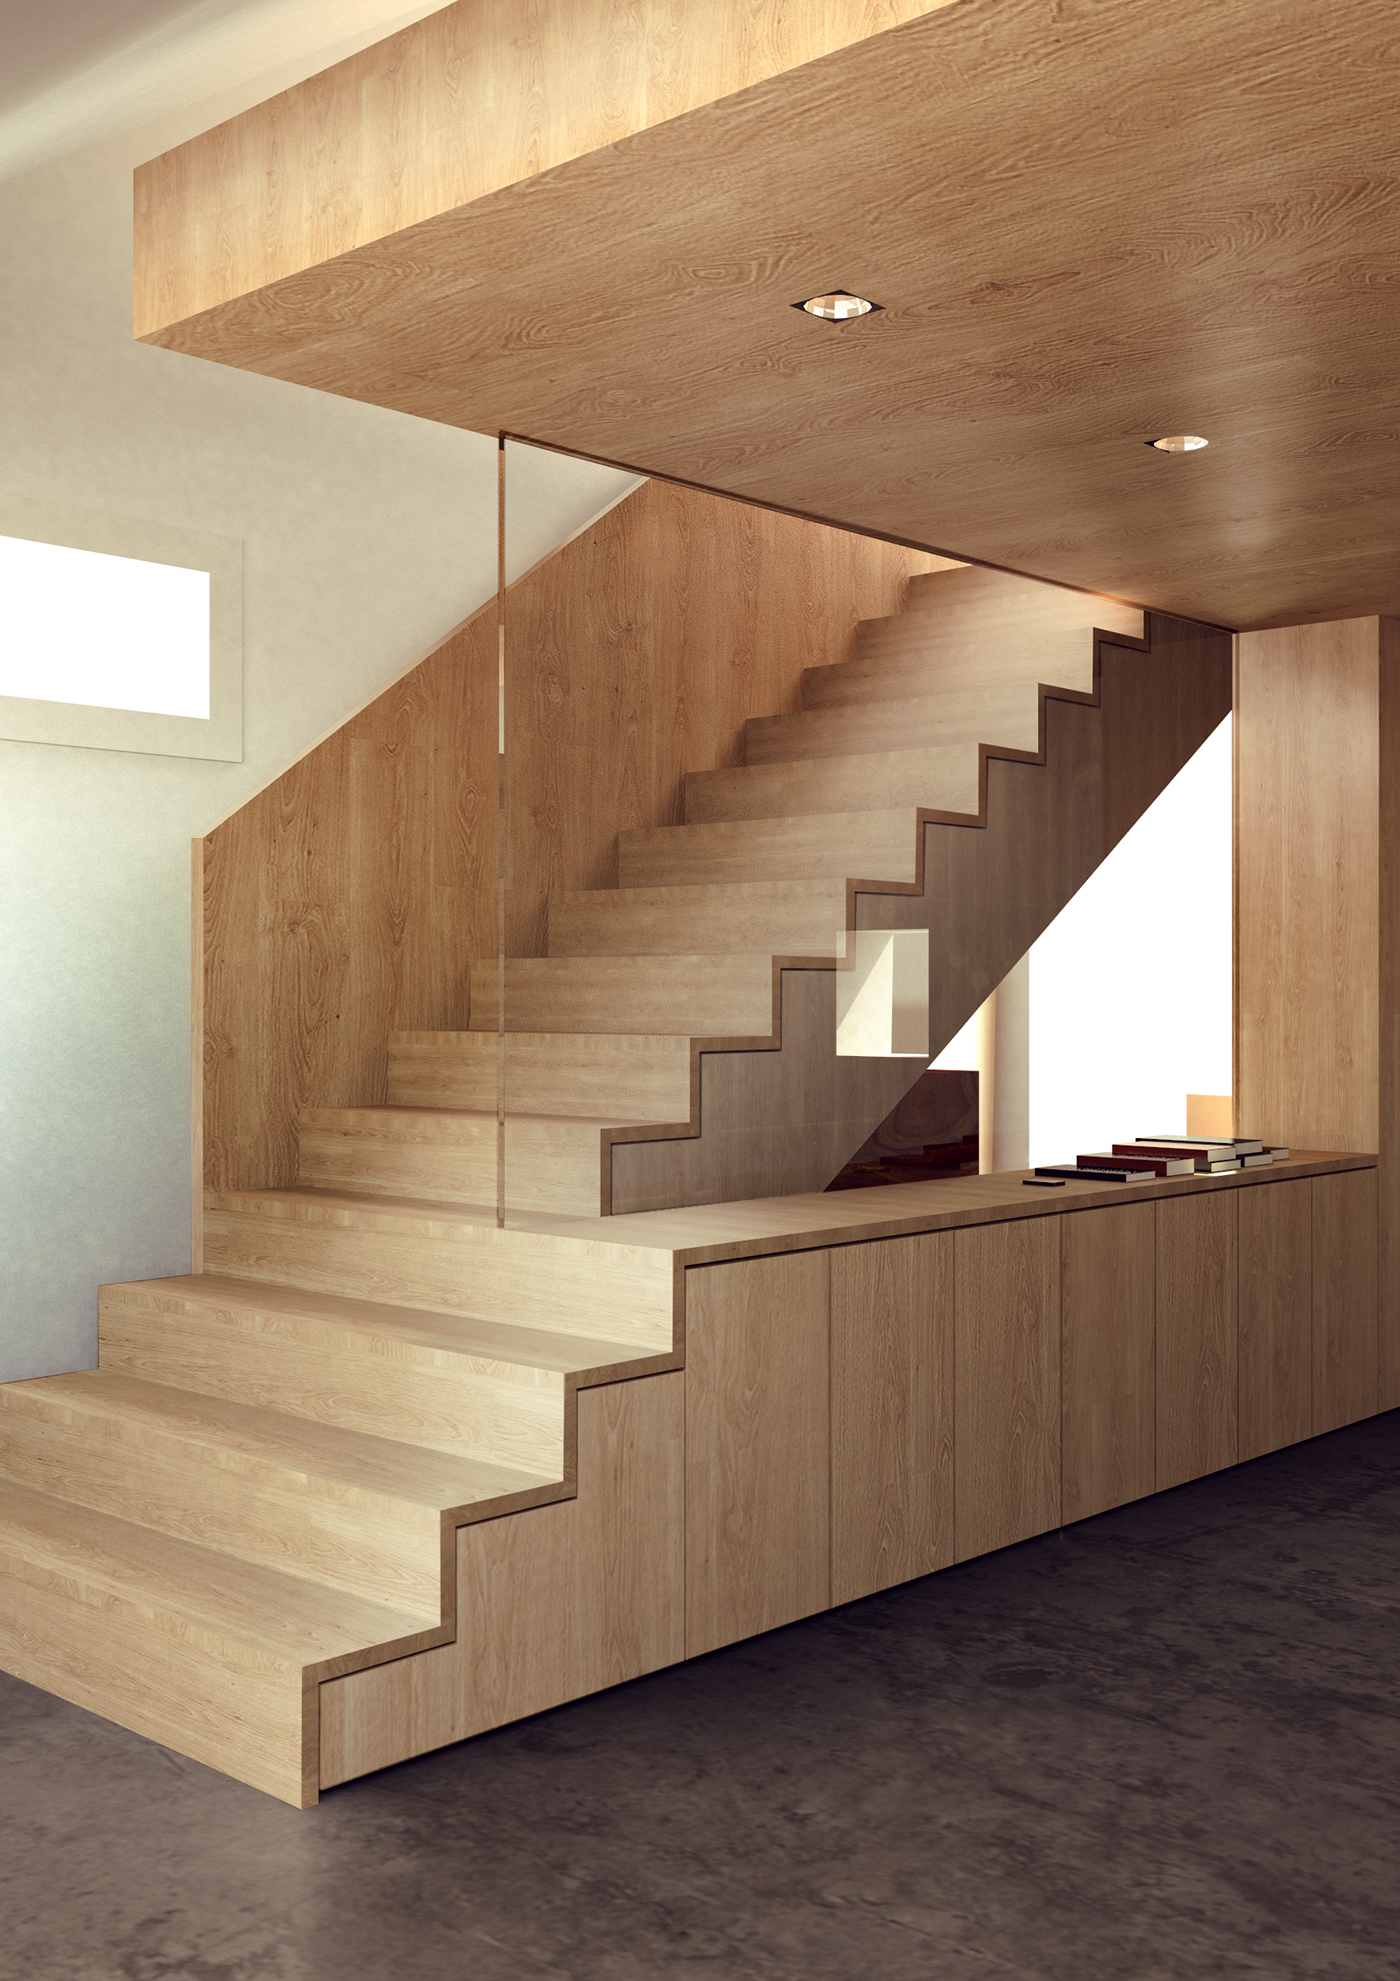 CGI Architecture Stairs on Behance